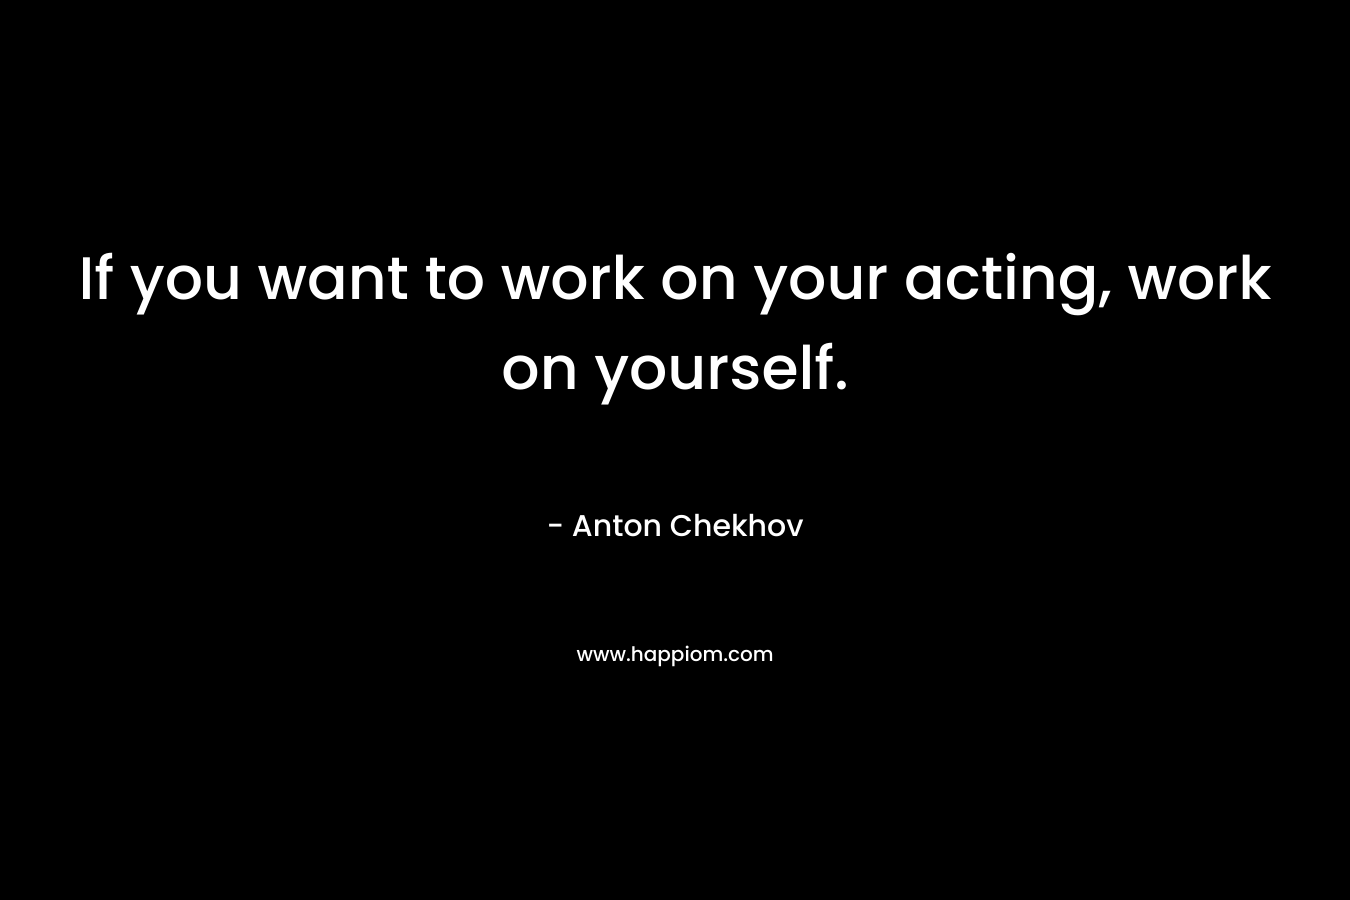 If you want to work on your acting, work on yourself.